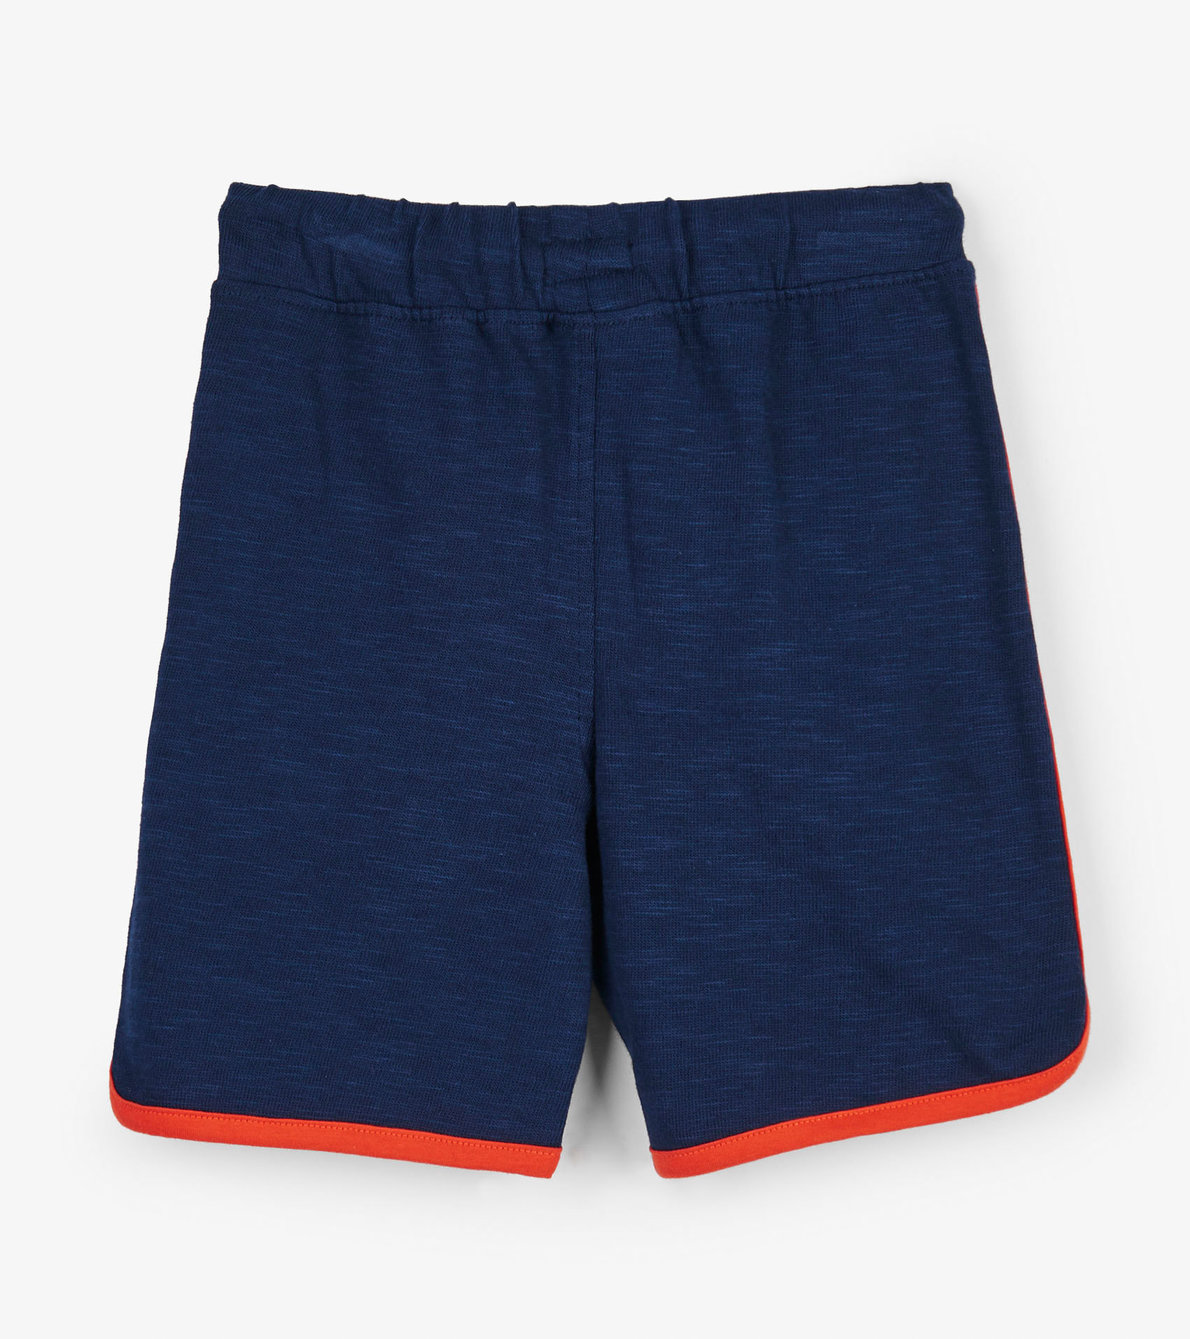 View larger image of Navy Athletic Shorts